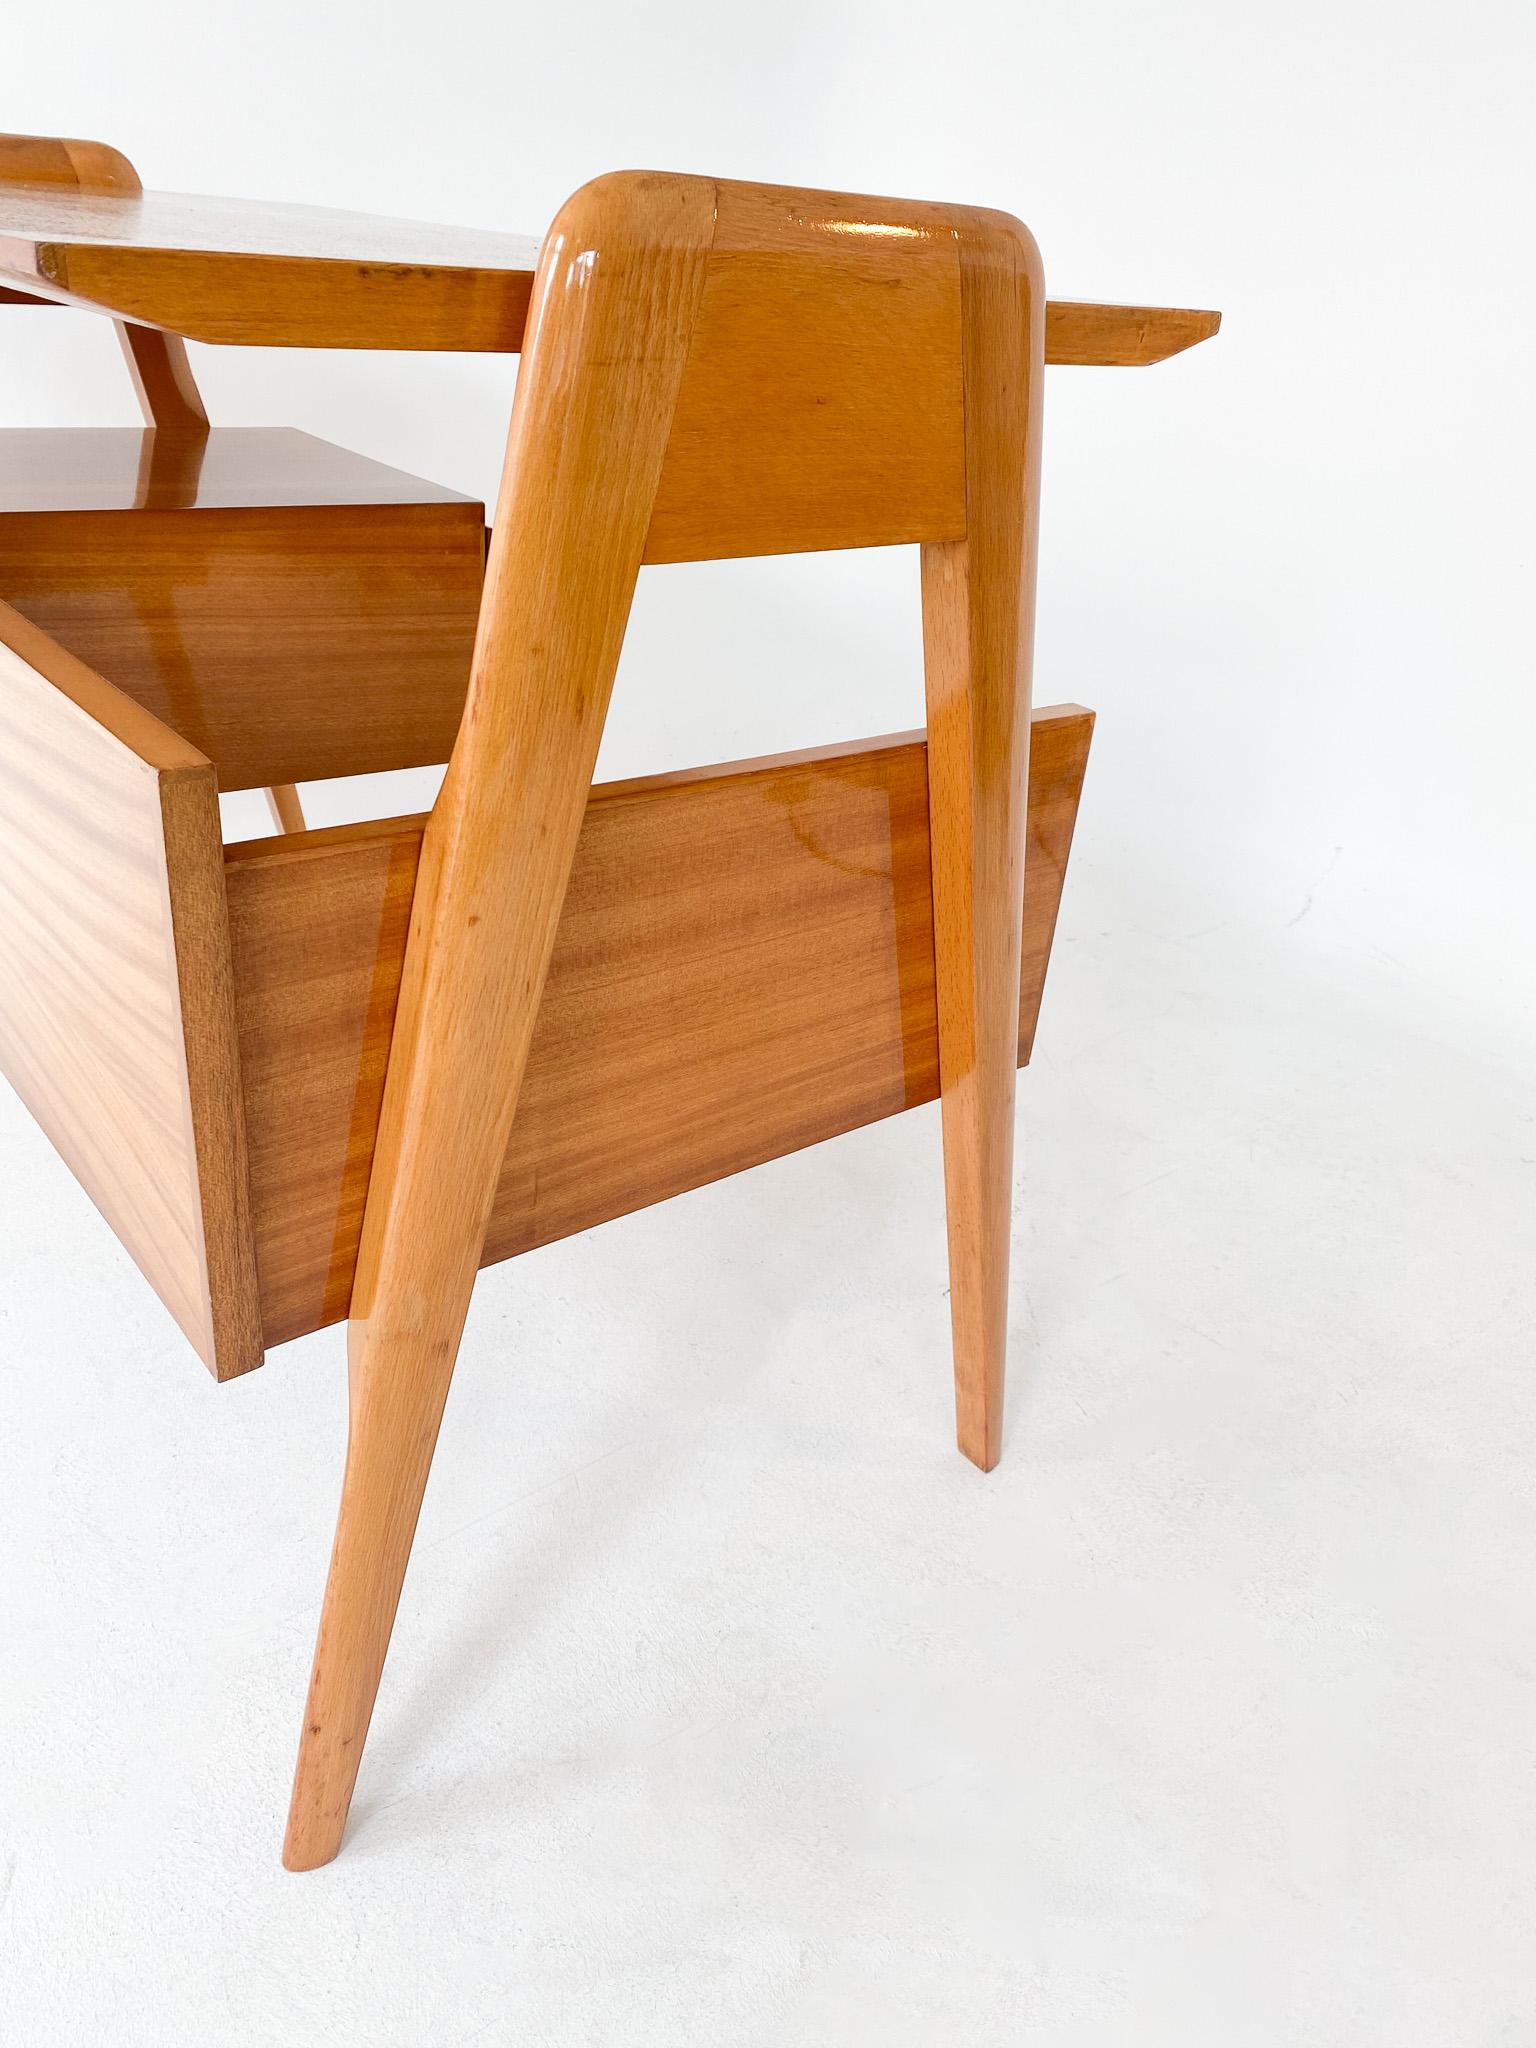 Ash  Mid-Century Modern Wooden Writing Desk by Vittorio Dassi, Italy 1950s